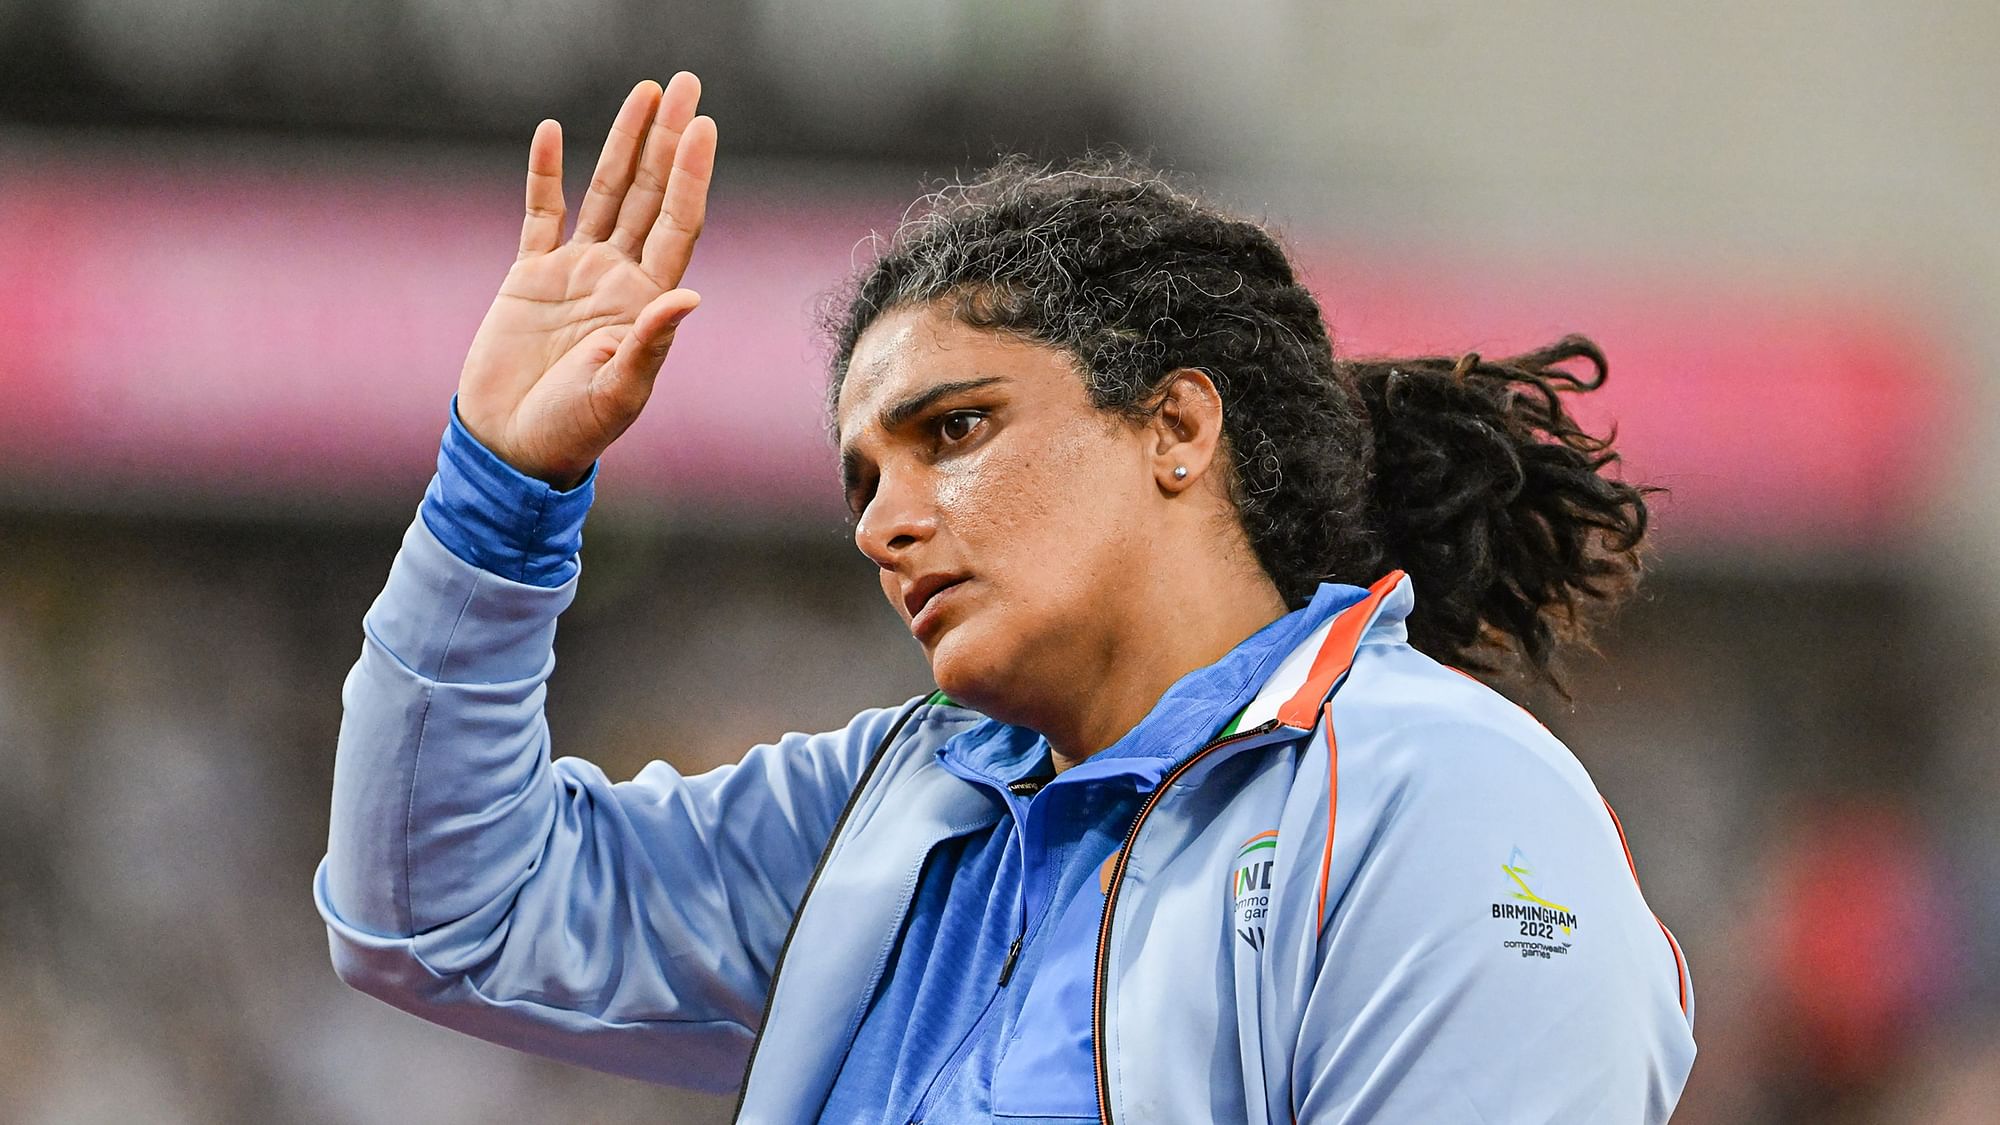 <div class="paragraphs"><p>India's Seema Punia during the women's discus throw final event at the 2022 Commonwealth Games in Birmingham.</p></div>